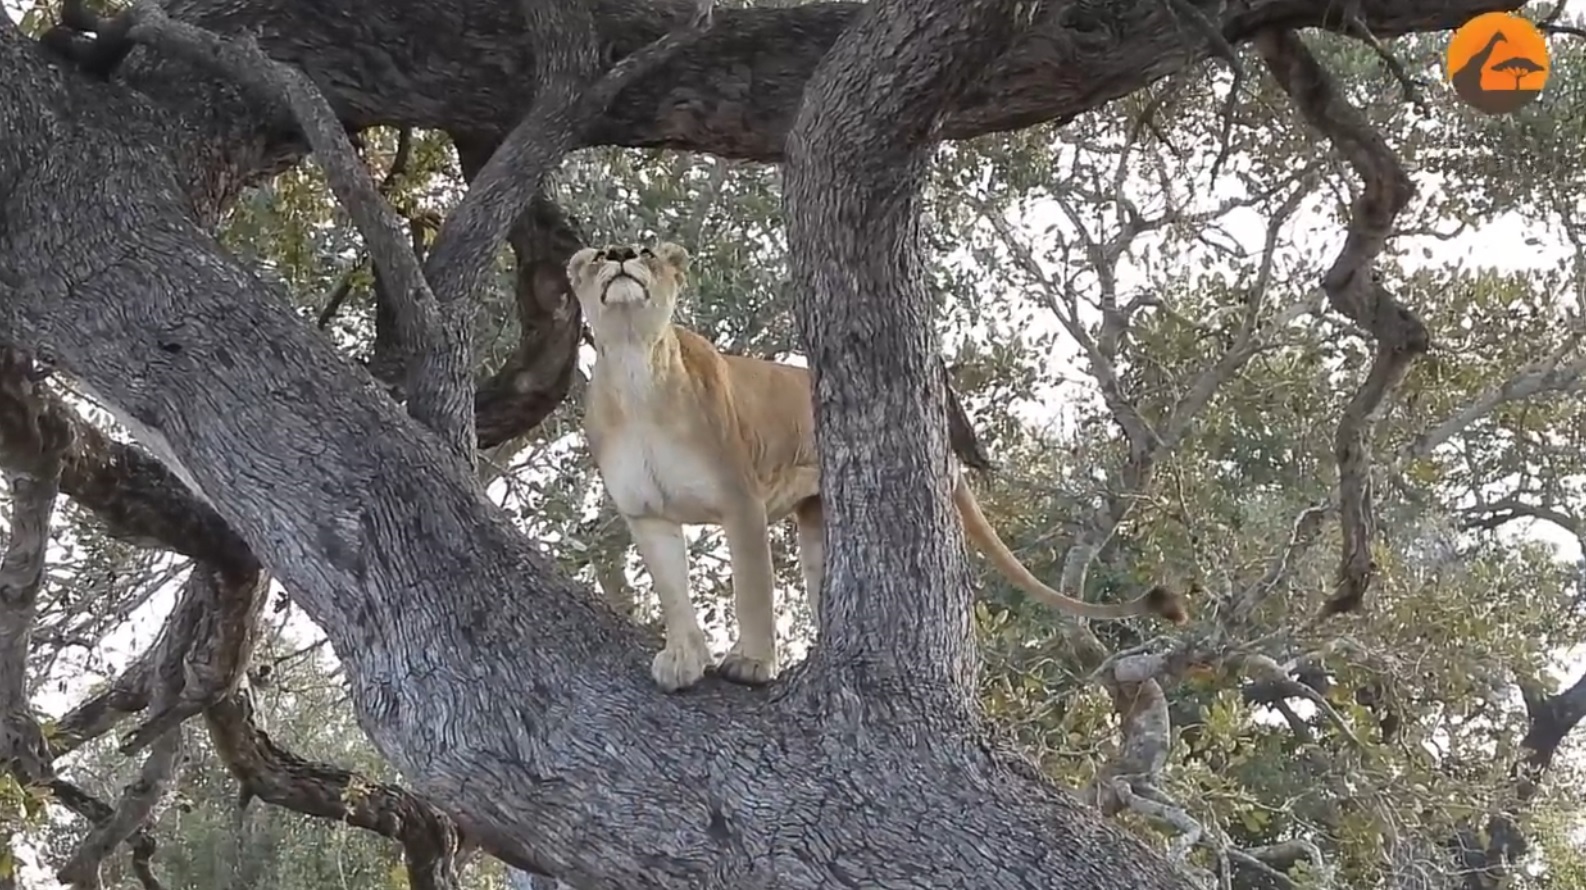 Lions Try To Climb Tree To Get To Leopard